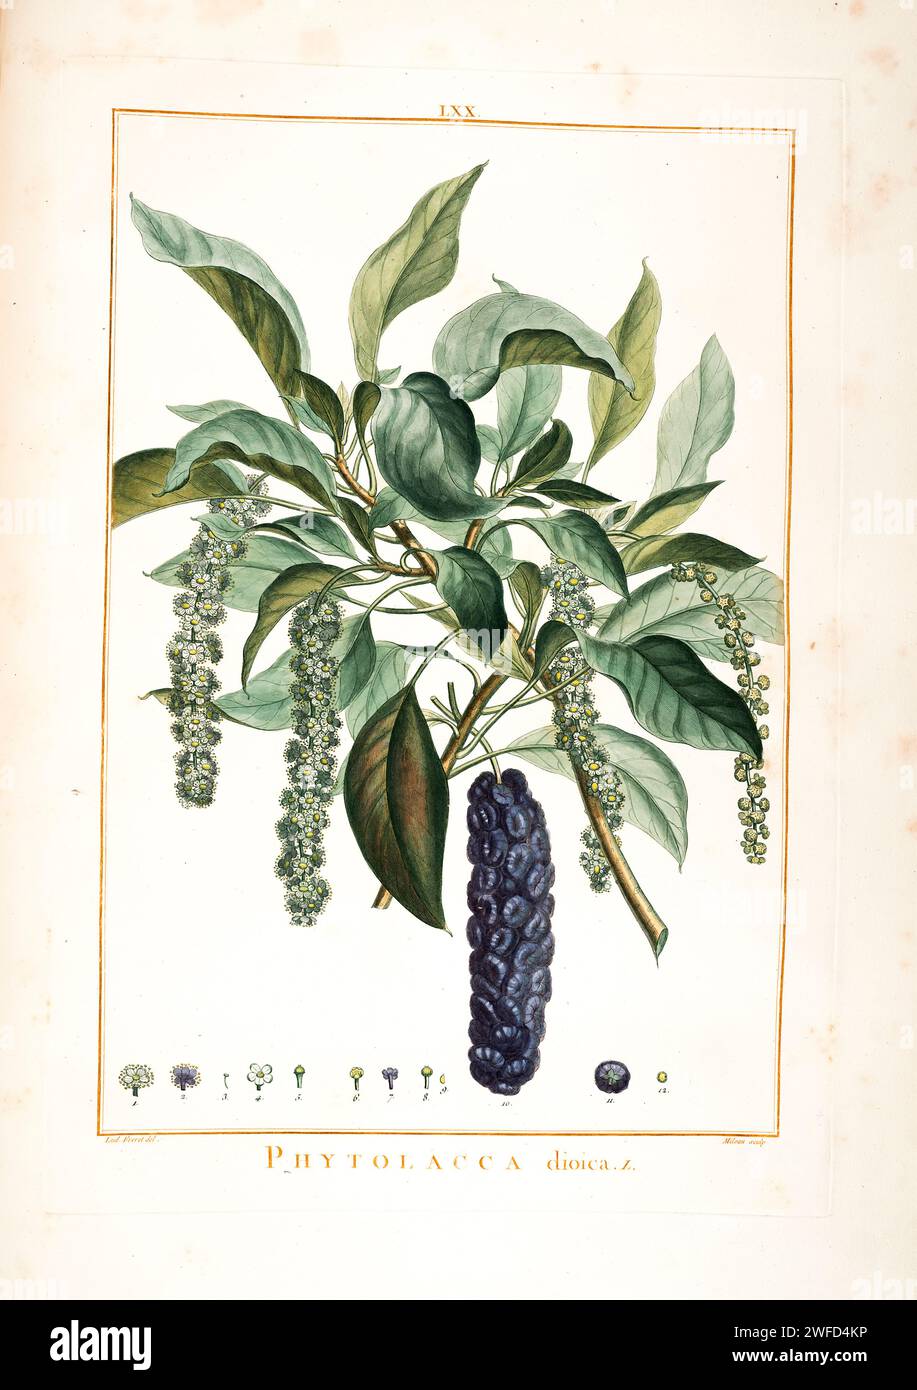 Phytolacca dioica, commonly known as ombú in Spanish and umbu in Portuguese, is a massive evergreen tree in the Pokeweed Family native to the Pampas of South America.Hand Painted by Pierre-Joseph Redouté and published in Stirpes Novae aut Minus Cognitae (1784) by Charles Louis L'Héritier de Brutelle. Stock Photo